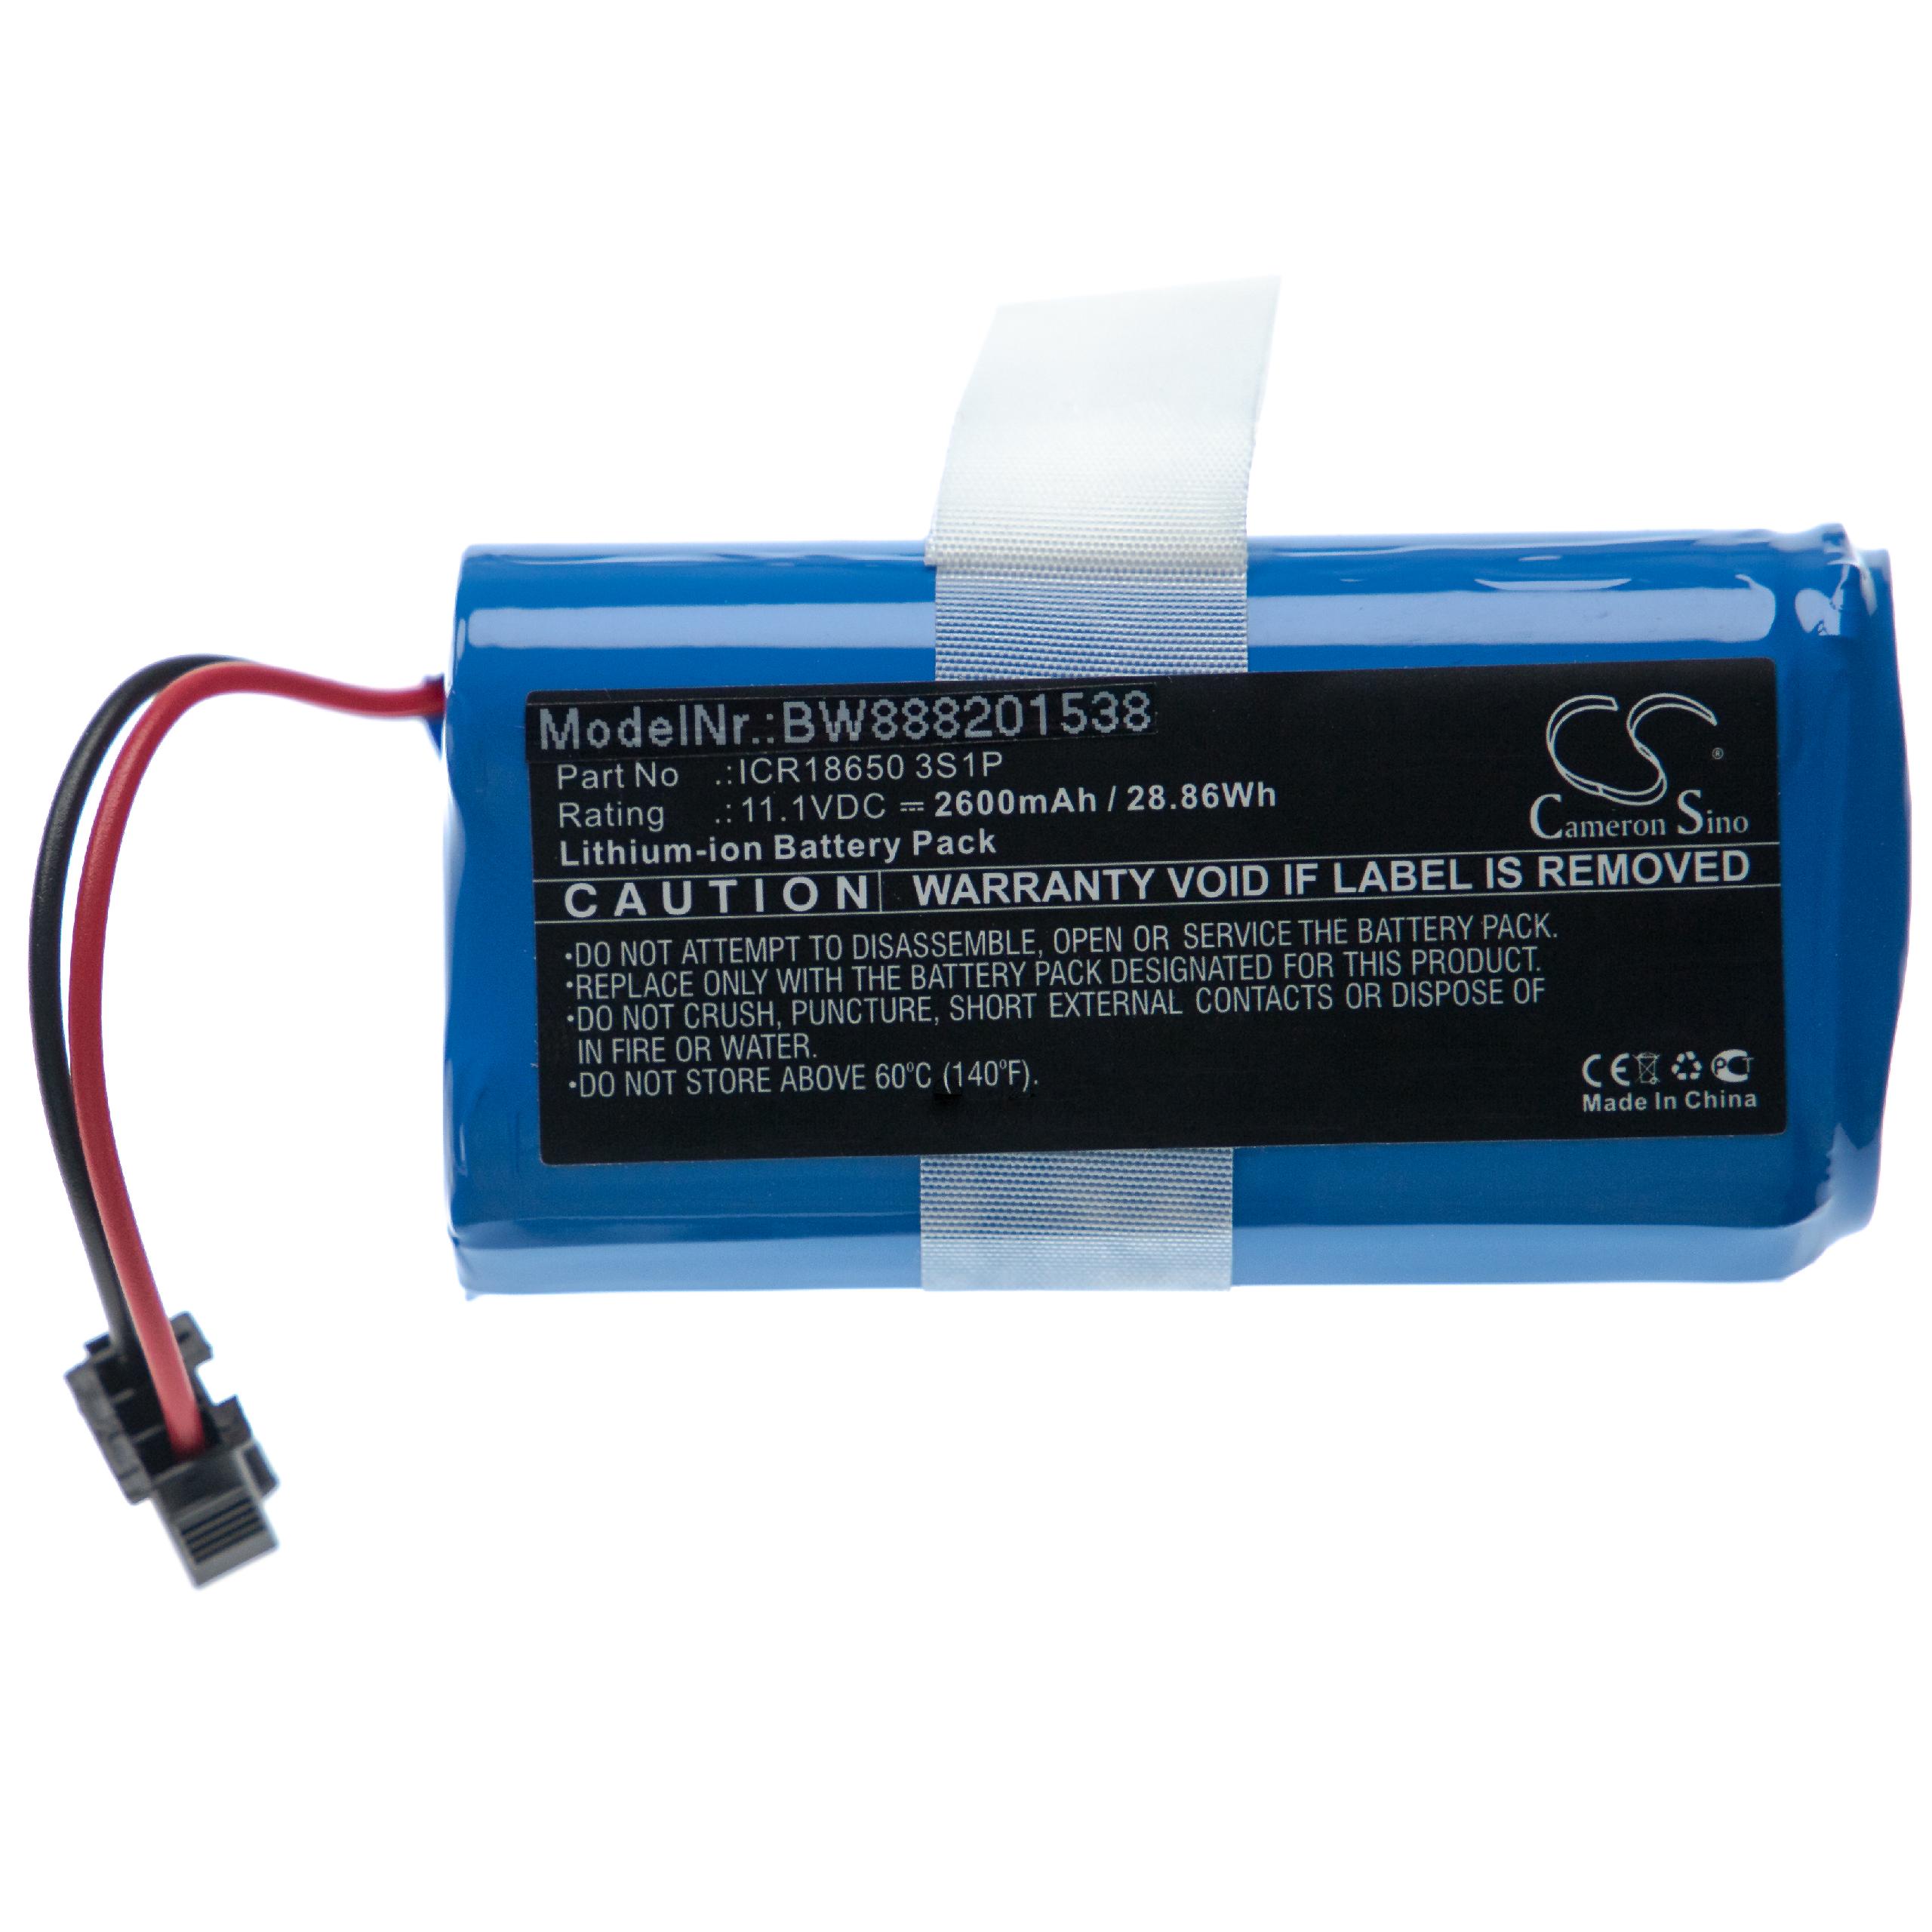 Battery Replacement for Ecovacs UR18650ZY-3S1P-AAP for - 2600mAh, 10.8V, Li-Ion